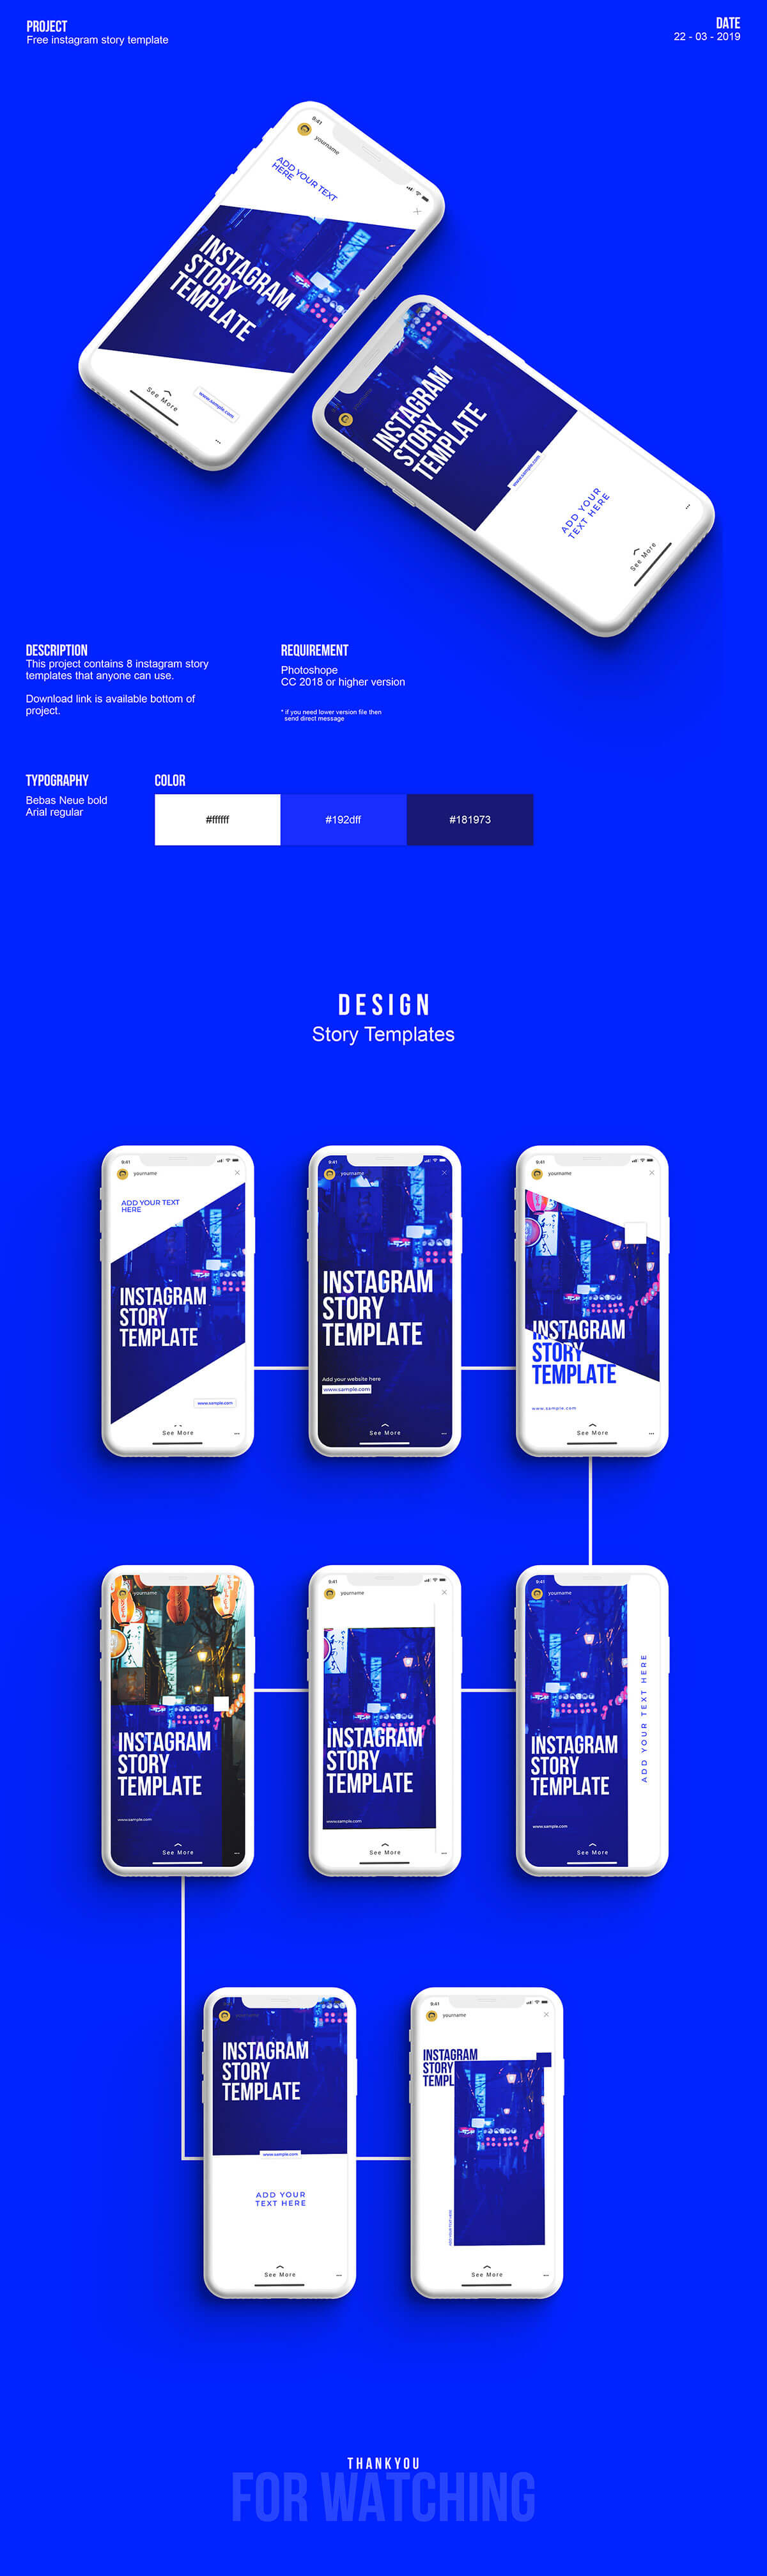 8 Free Instagram Story Templates